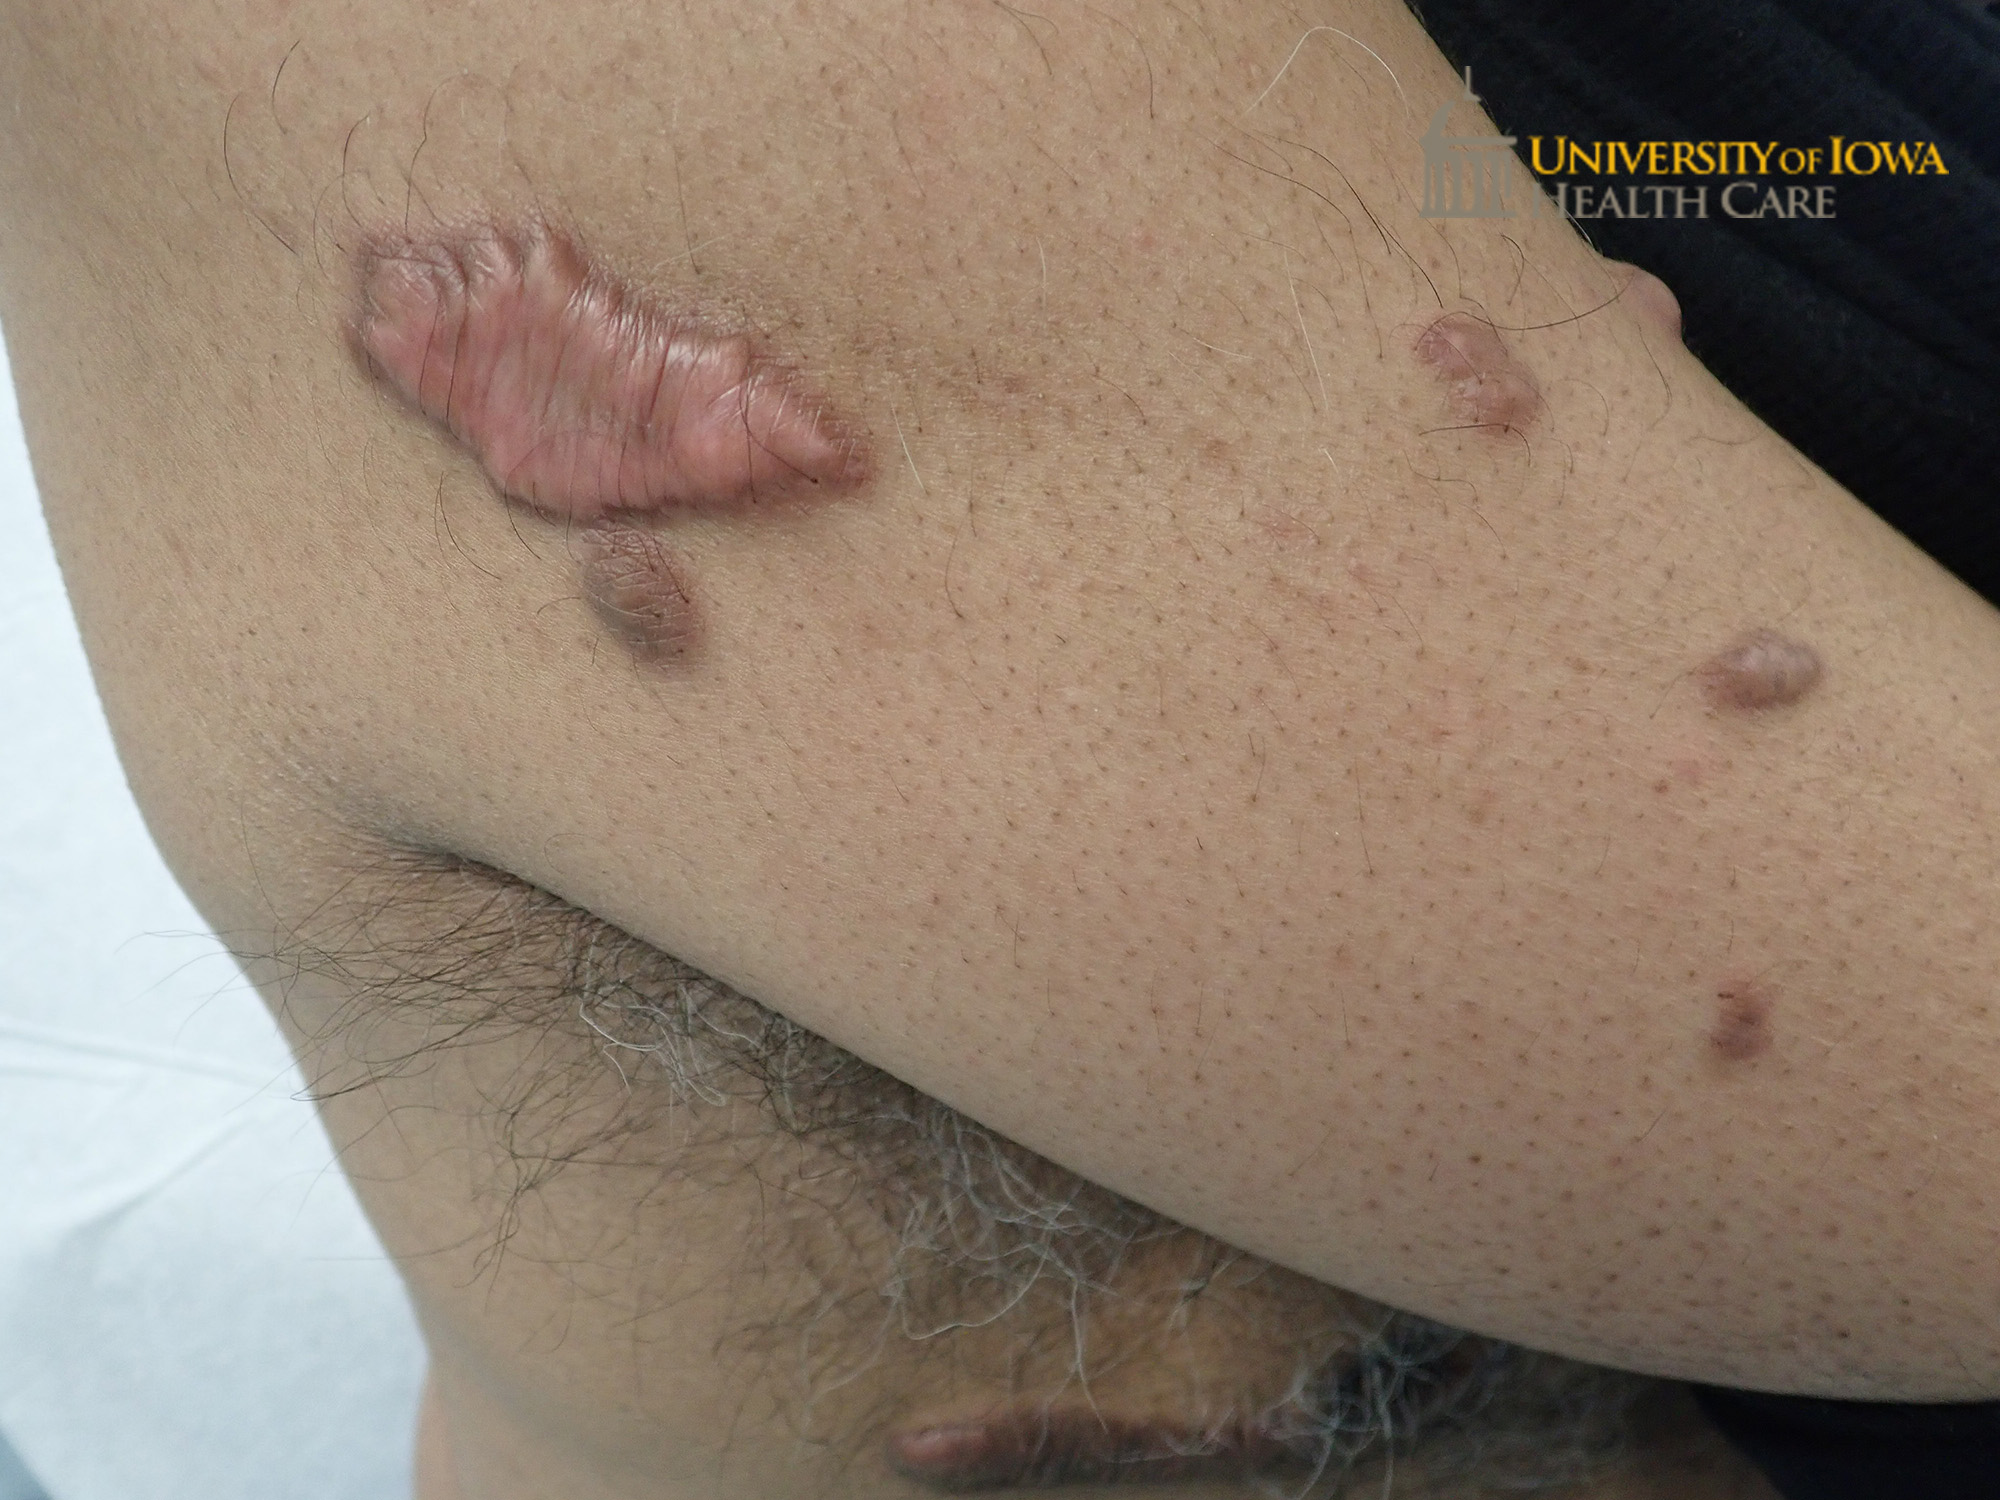 Pink to hyperpigmented papules and linear plaques on the lateral arm and trunk. (click images for higher resolution).